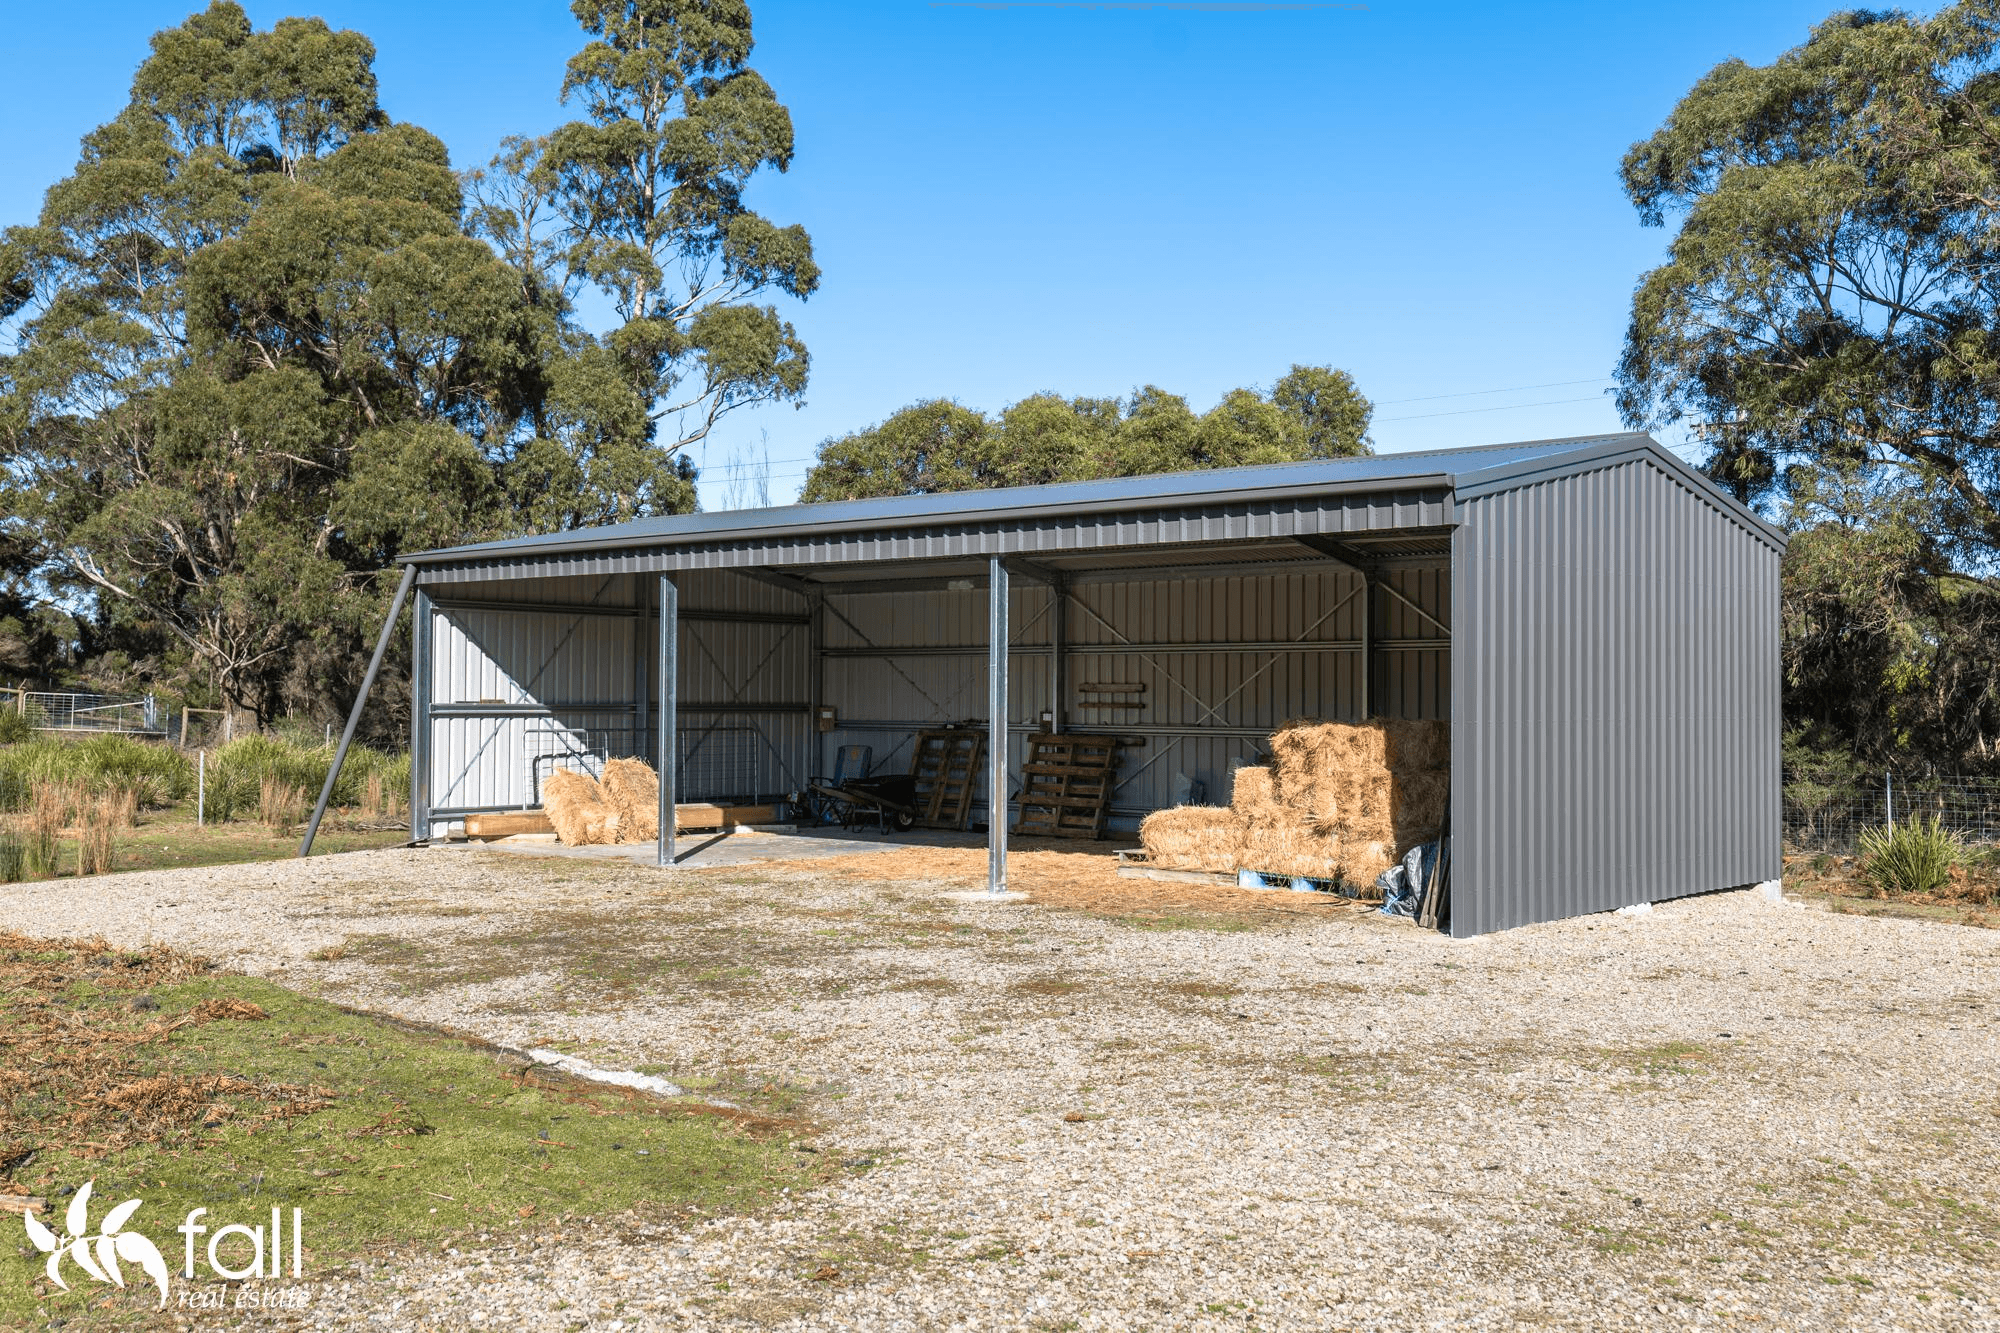 The Cloudy Bay Shed